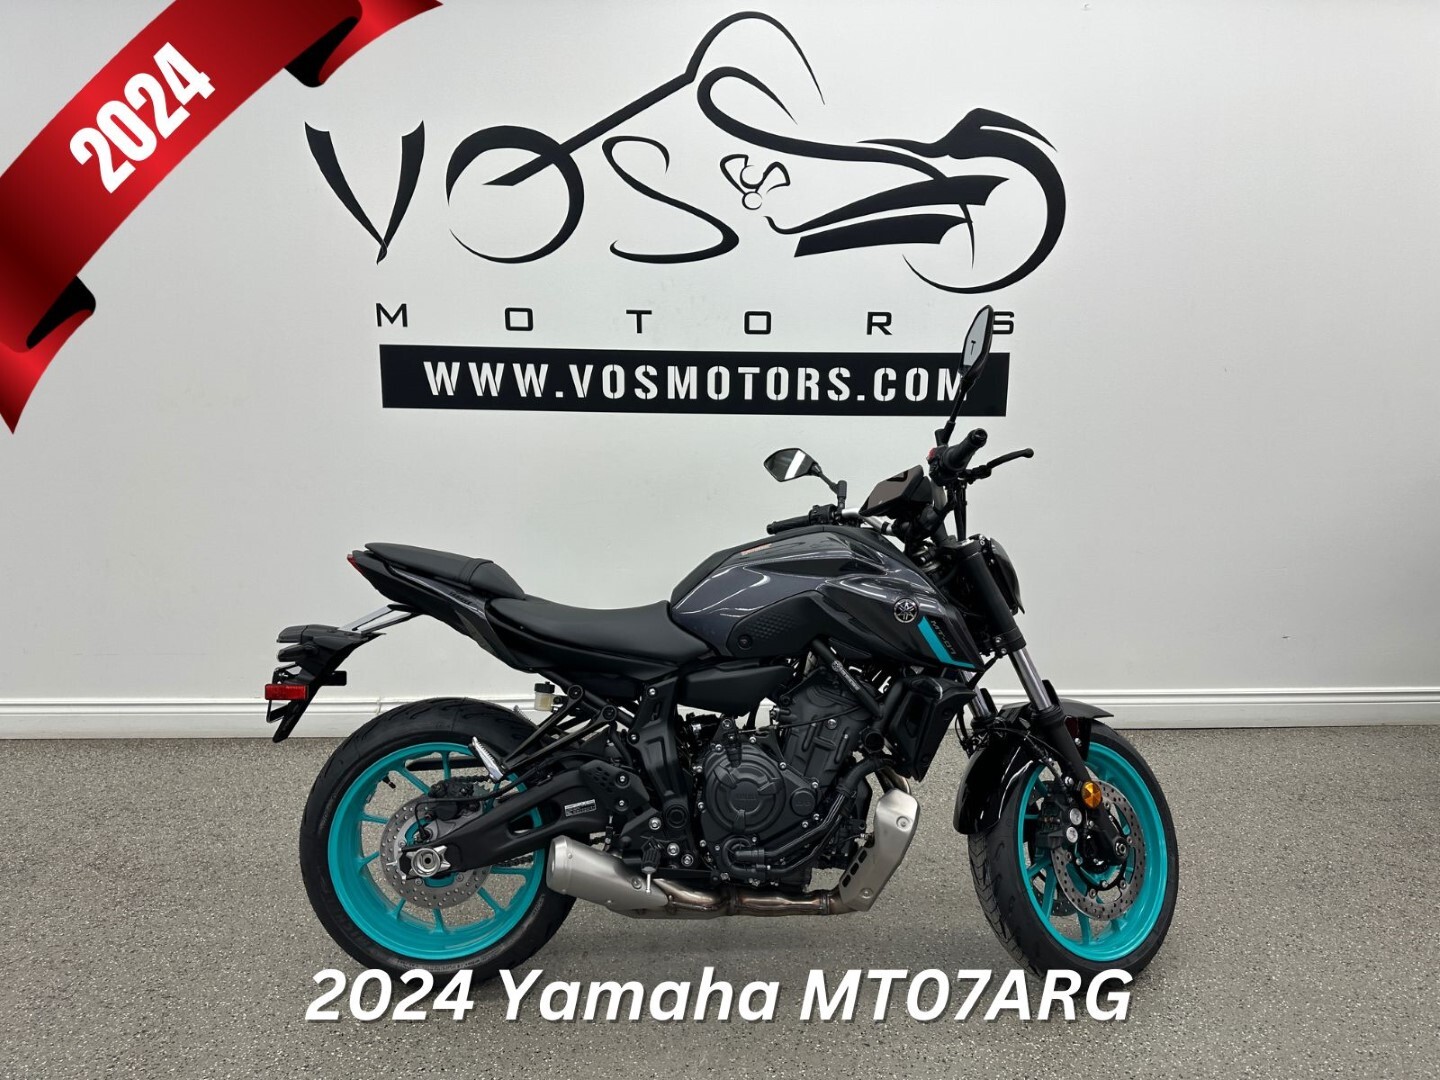 2024 Yamaha MT07ARG MT07ARG - V5170 - -No Payments for 1 Year**